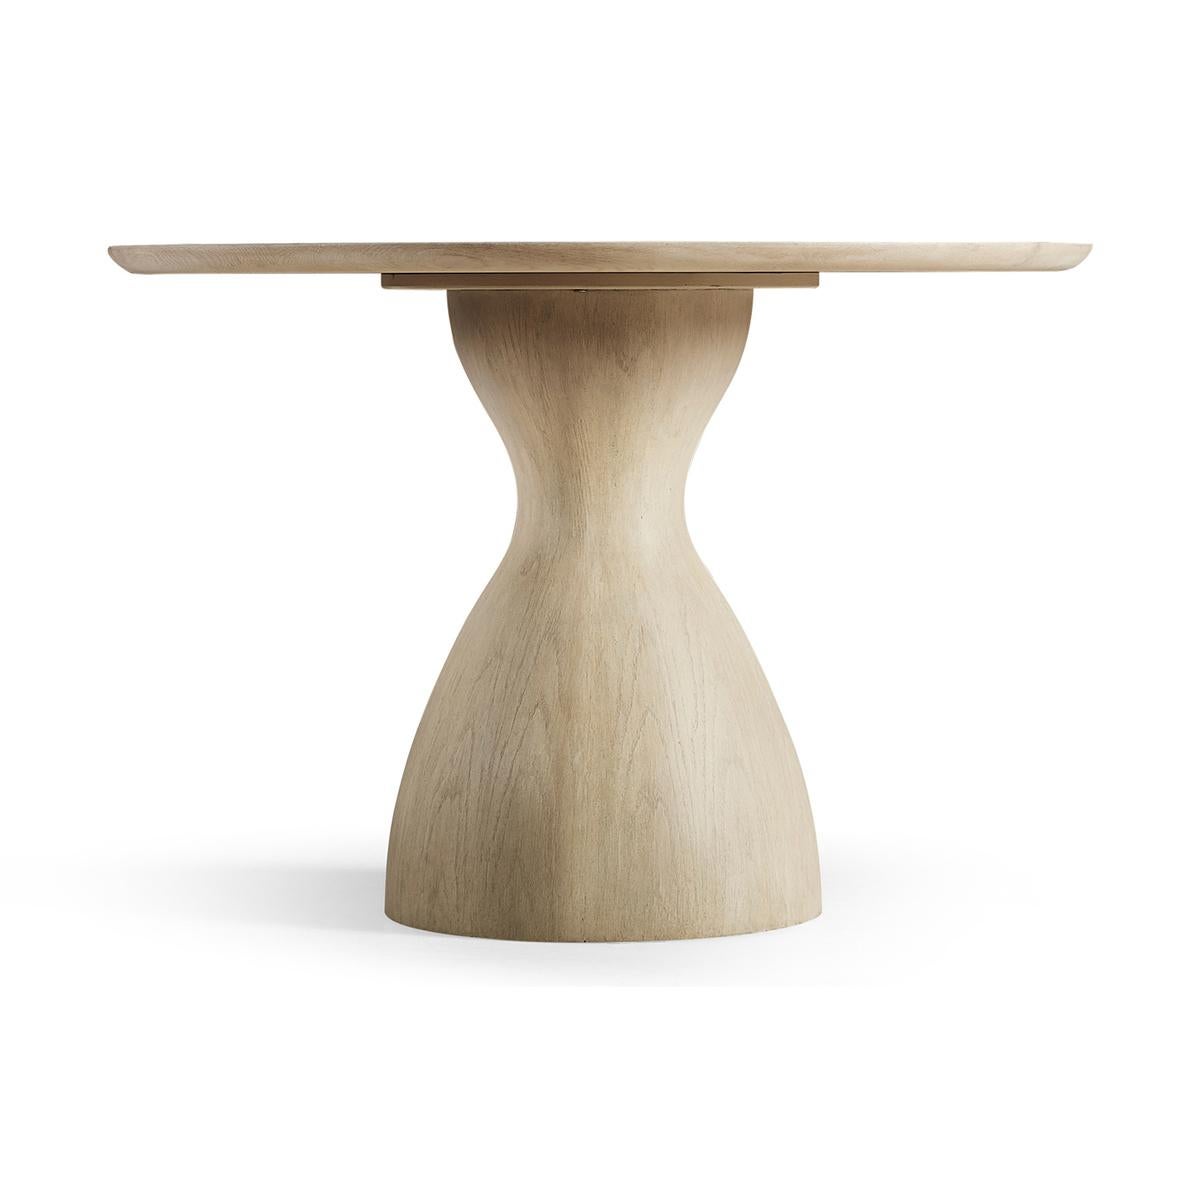 Organic oak pedestal dining table. Unending symmetry, remarkable simplicity and true down-to-Earth balance come together in expertly crafted solid hardwoods and veneers finished in bleached oak. A wood top features a center cut out revealing the